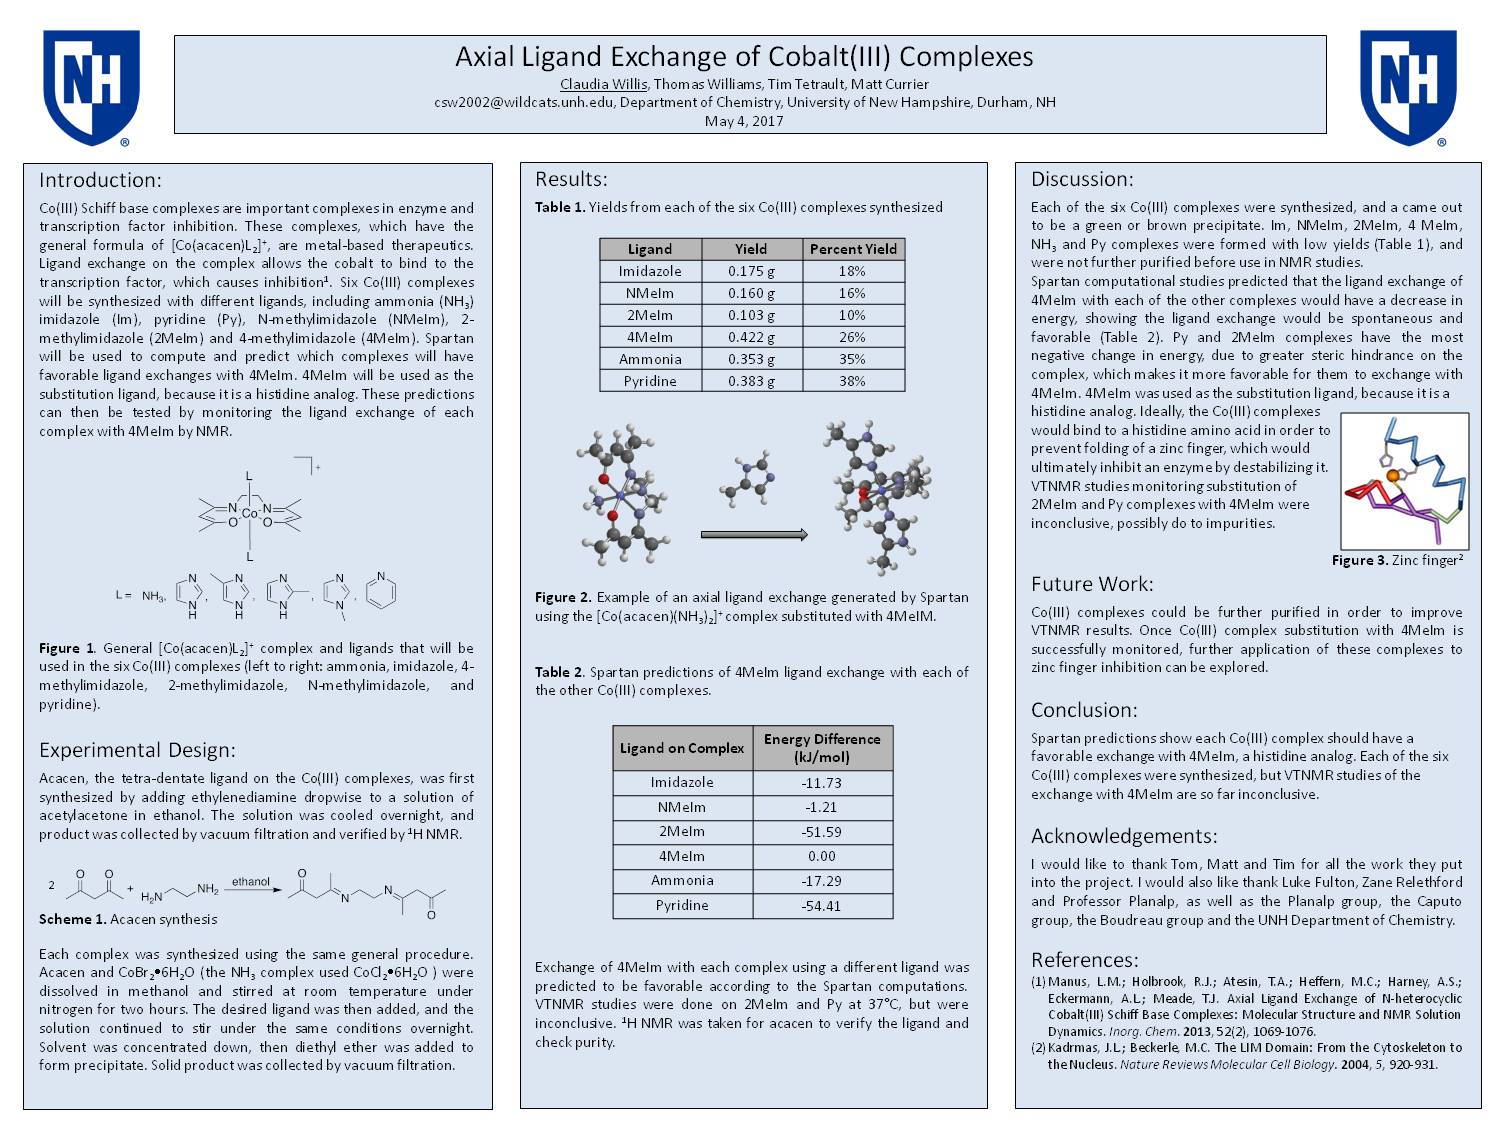 Axial Ligand Exchange Of Cobalt(Iii) Complexes by csw2002